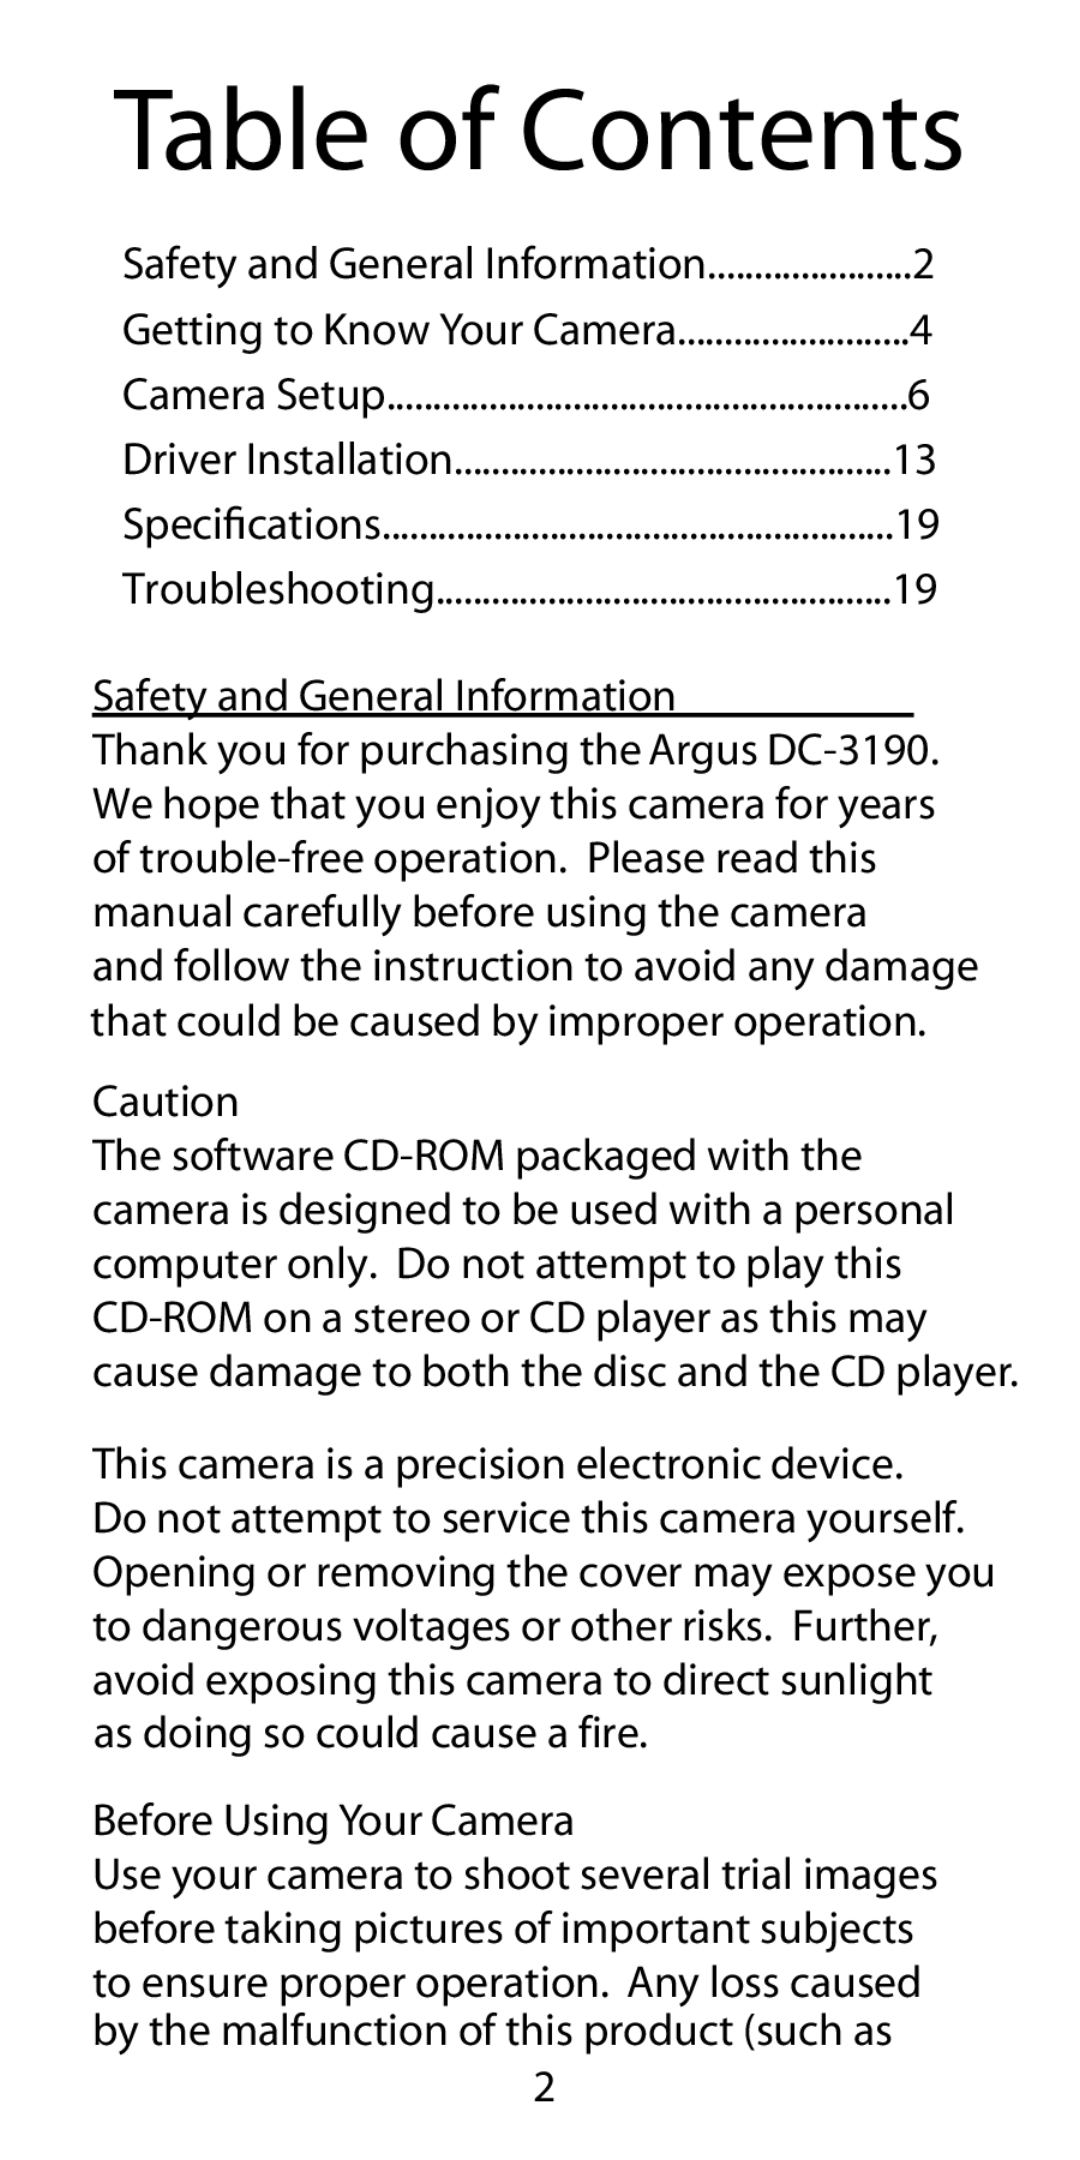 Argus Camera DC-3190 manual Safety and General Information, Before Using Your Camera, Table of Contents 